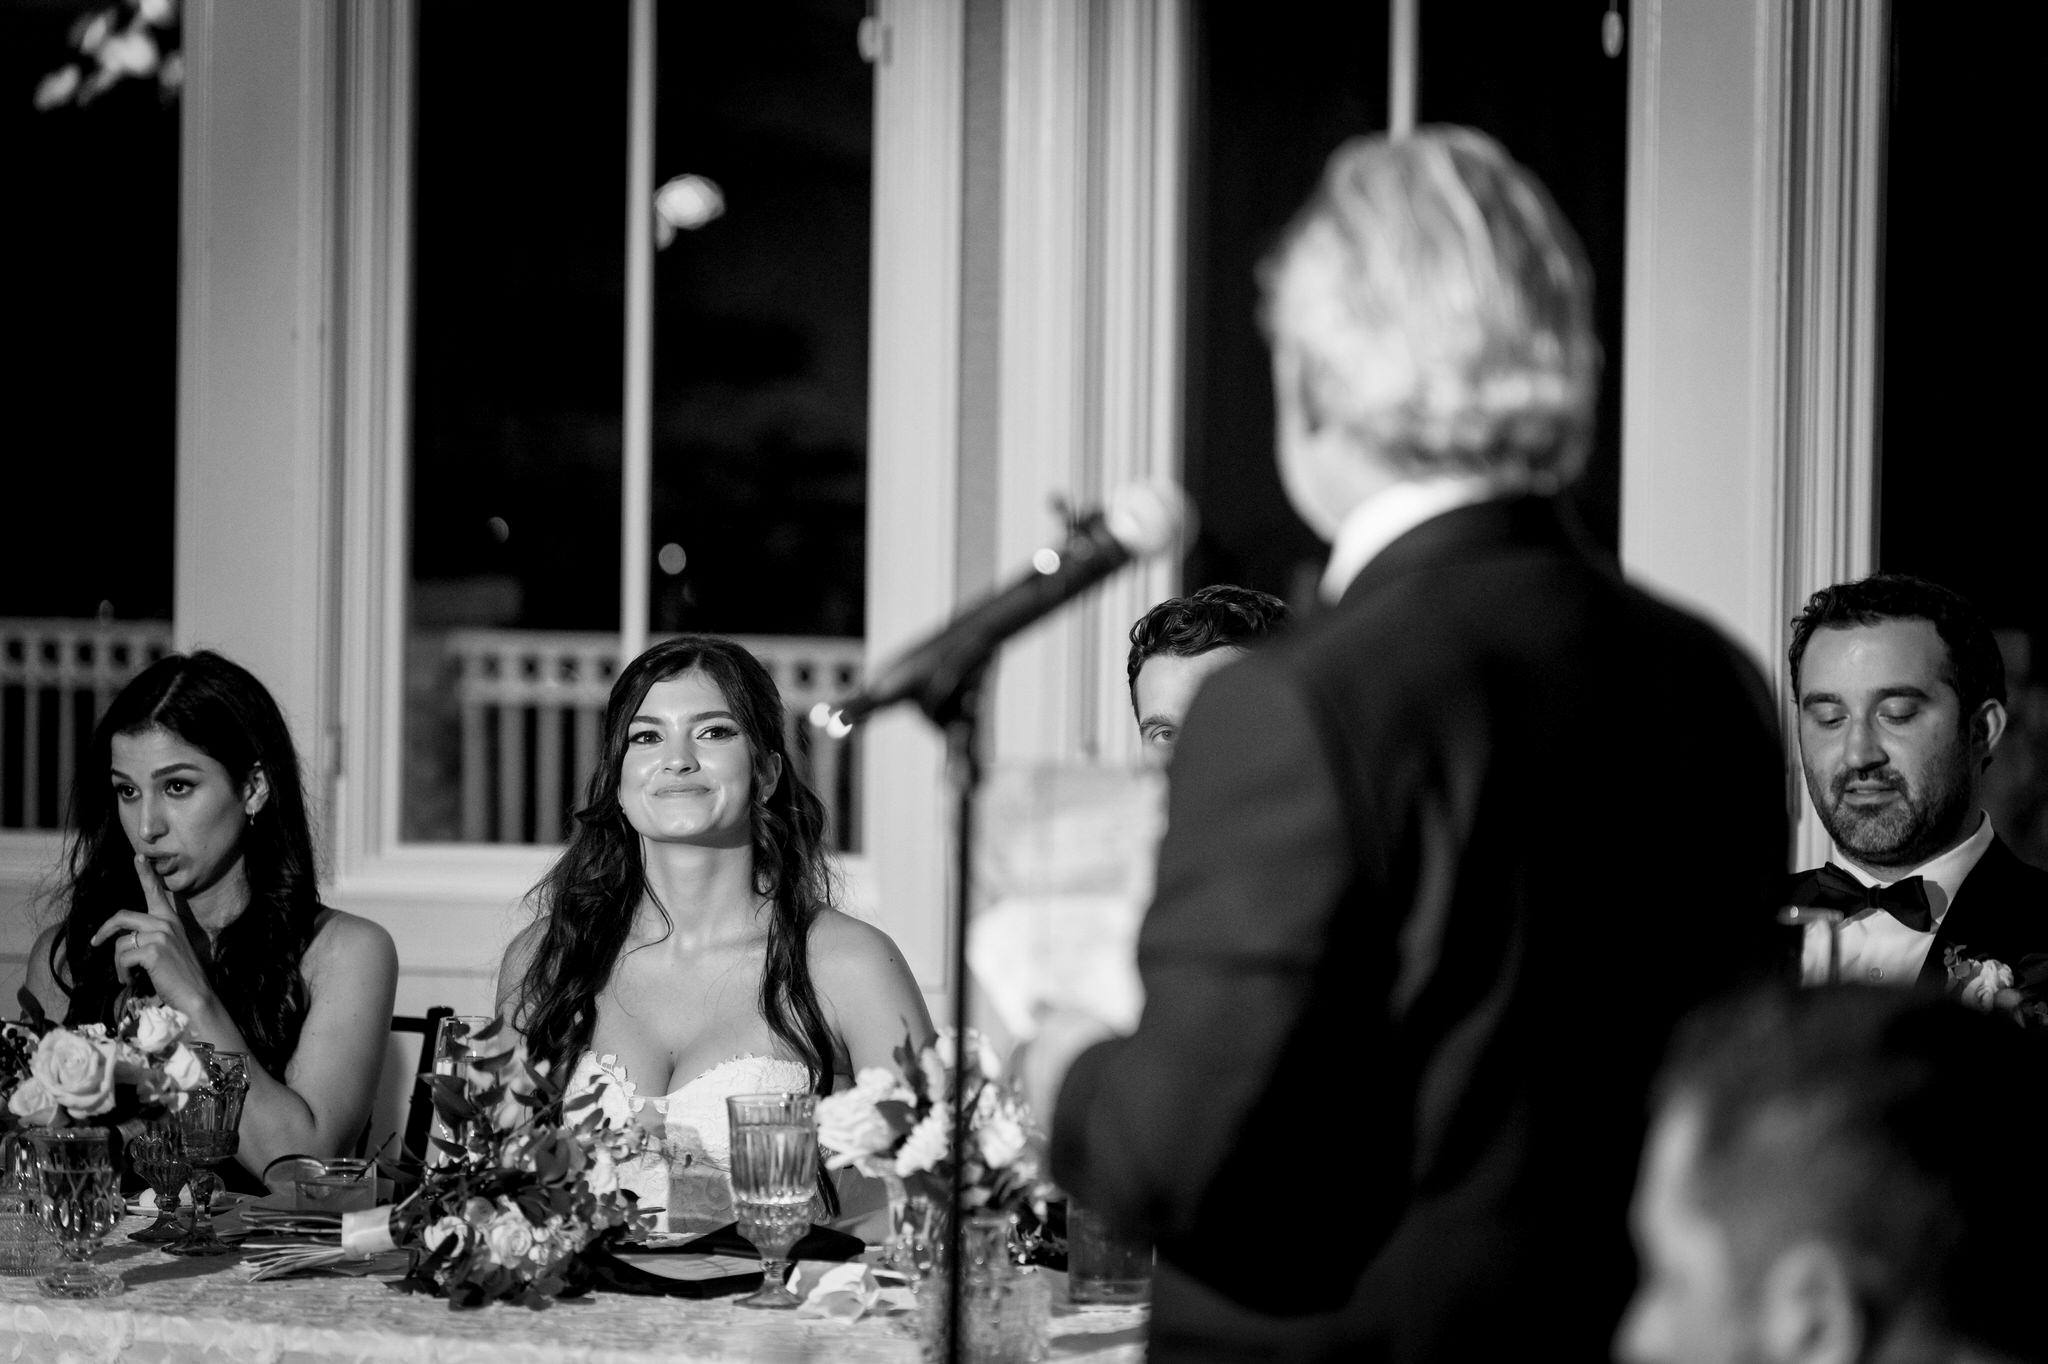 A bride looks at her father-in-law while he gives a wedding toast.